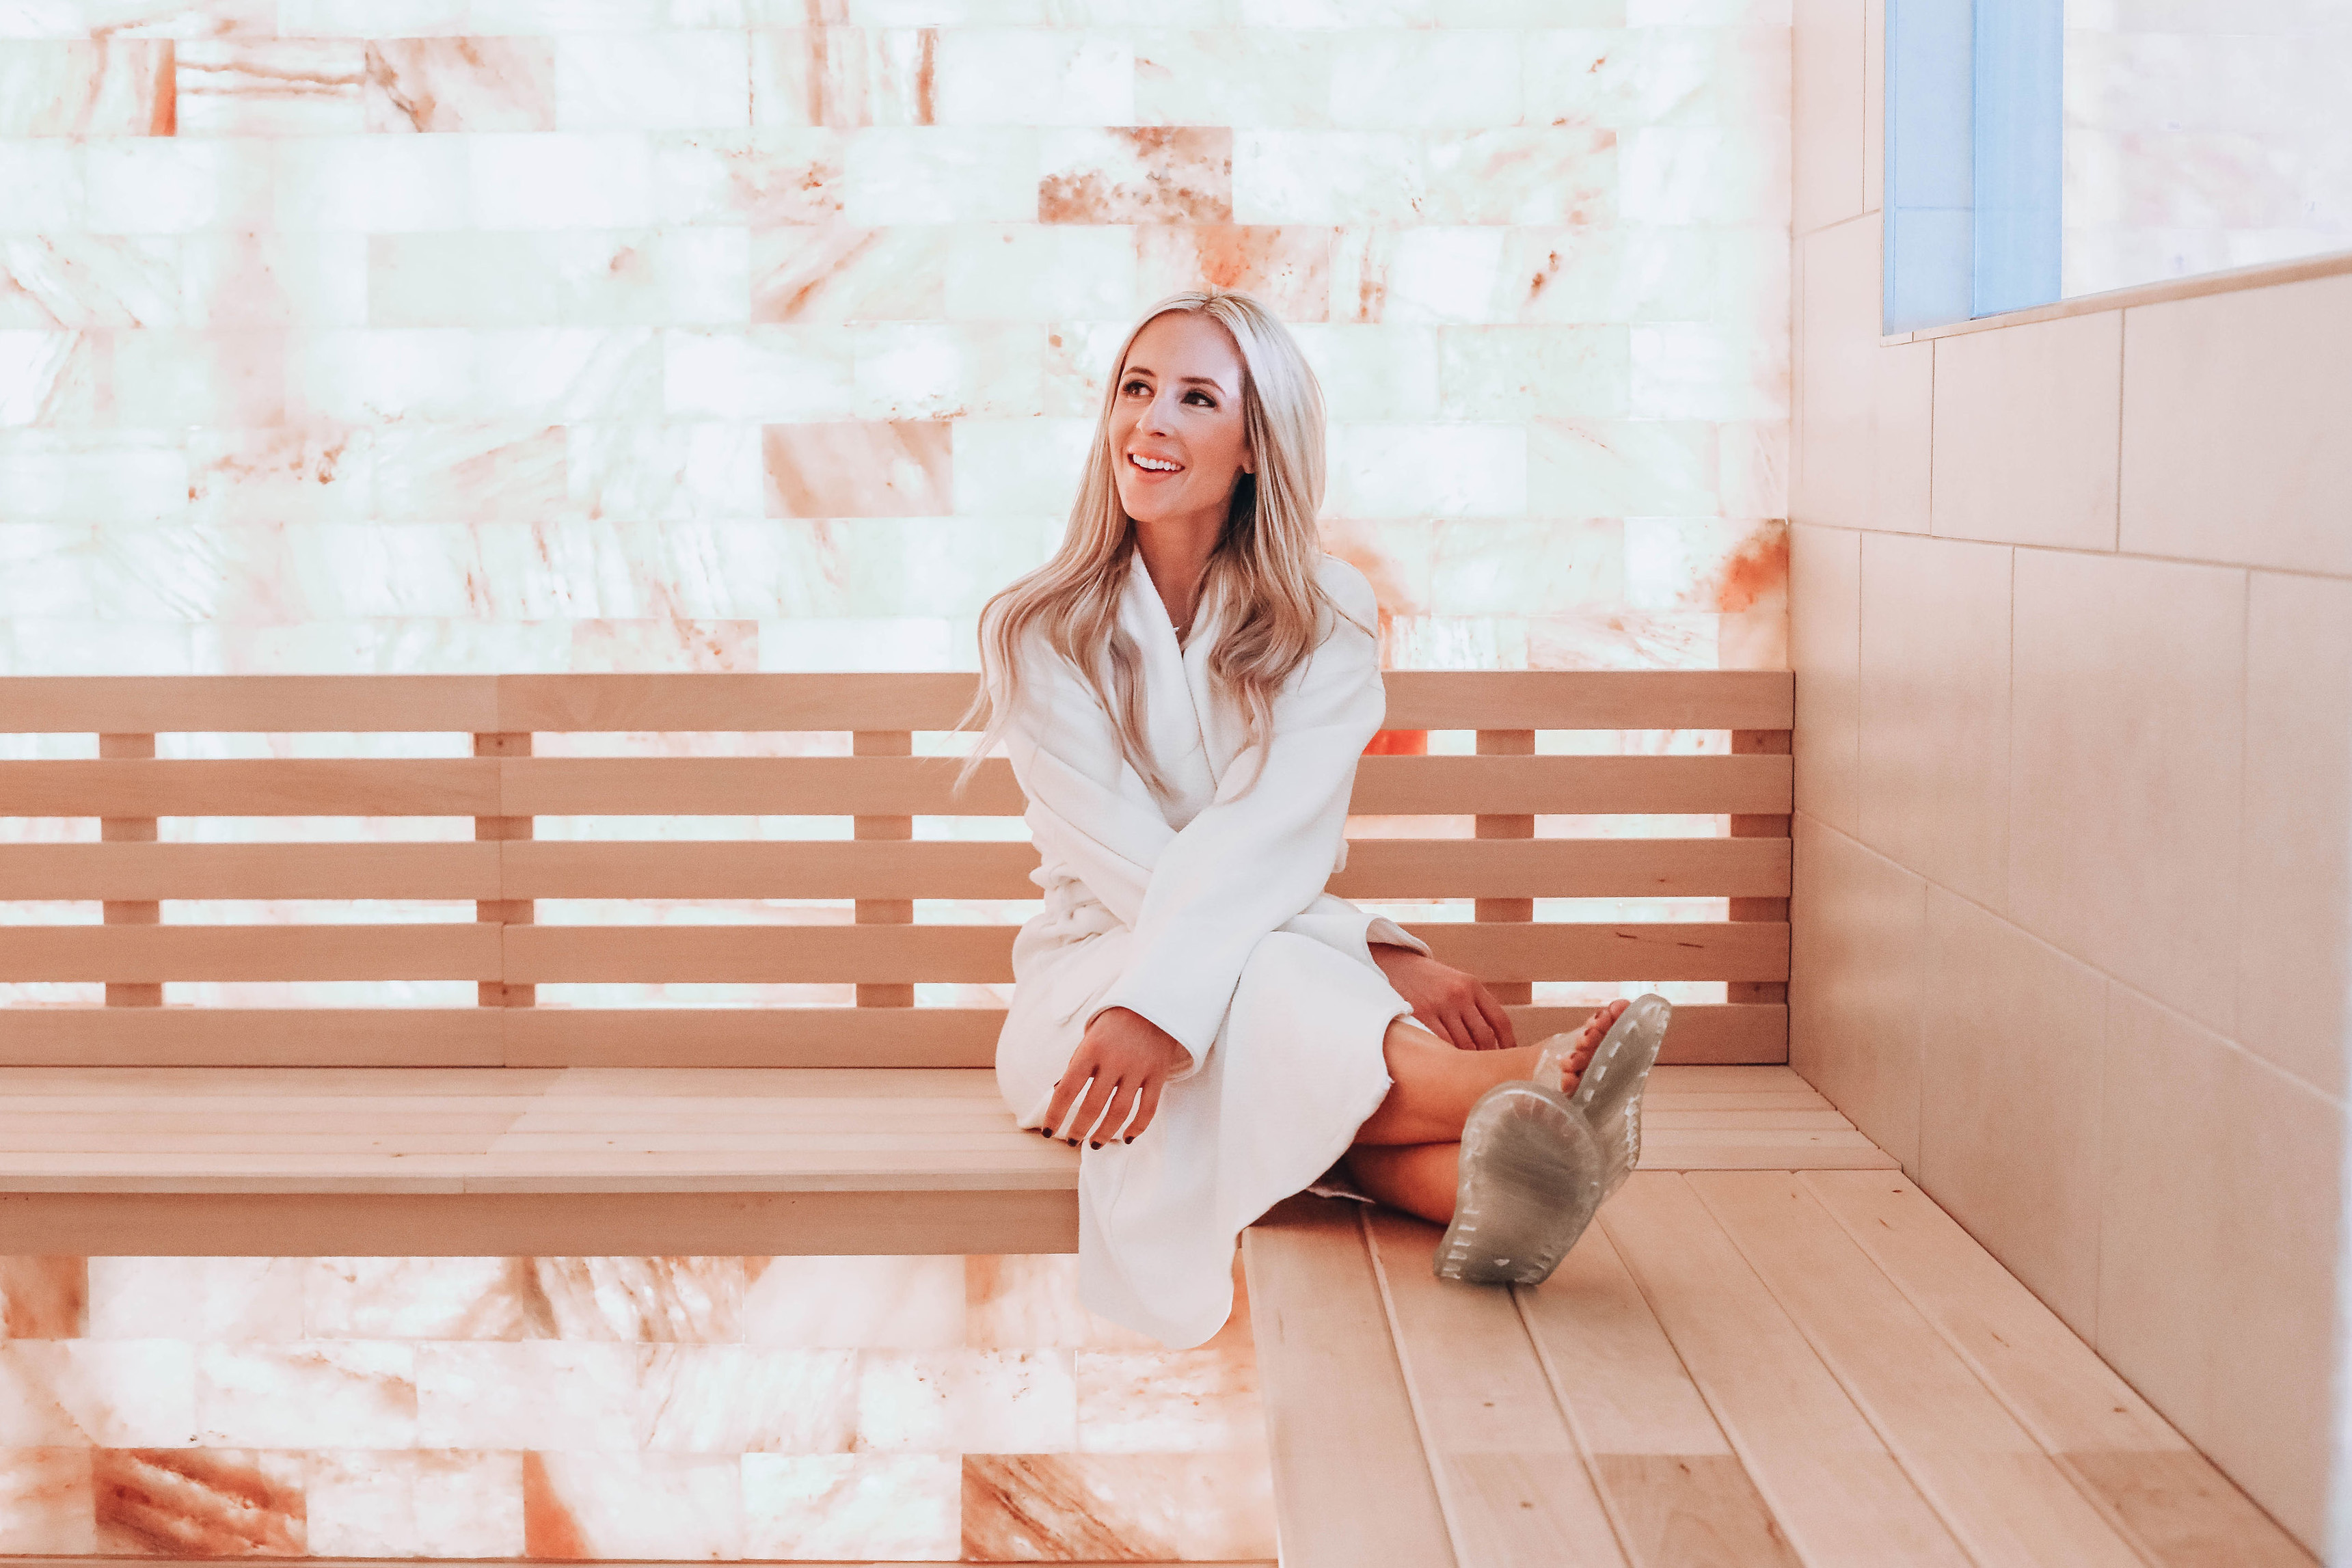 Reno Nevada Blogger Emily Farren Wieczorek gives you a behind the scenes look at the brand new - The Spa At The Silver Legacy